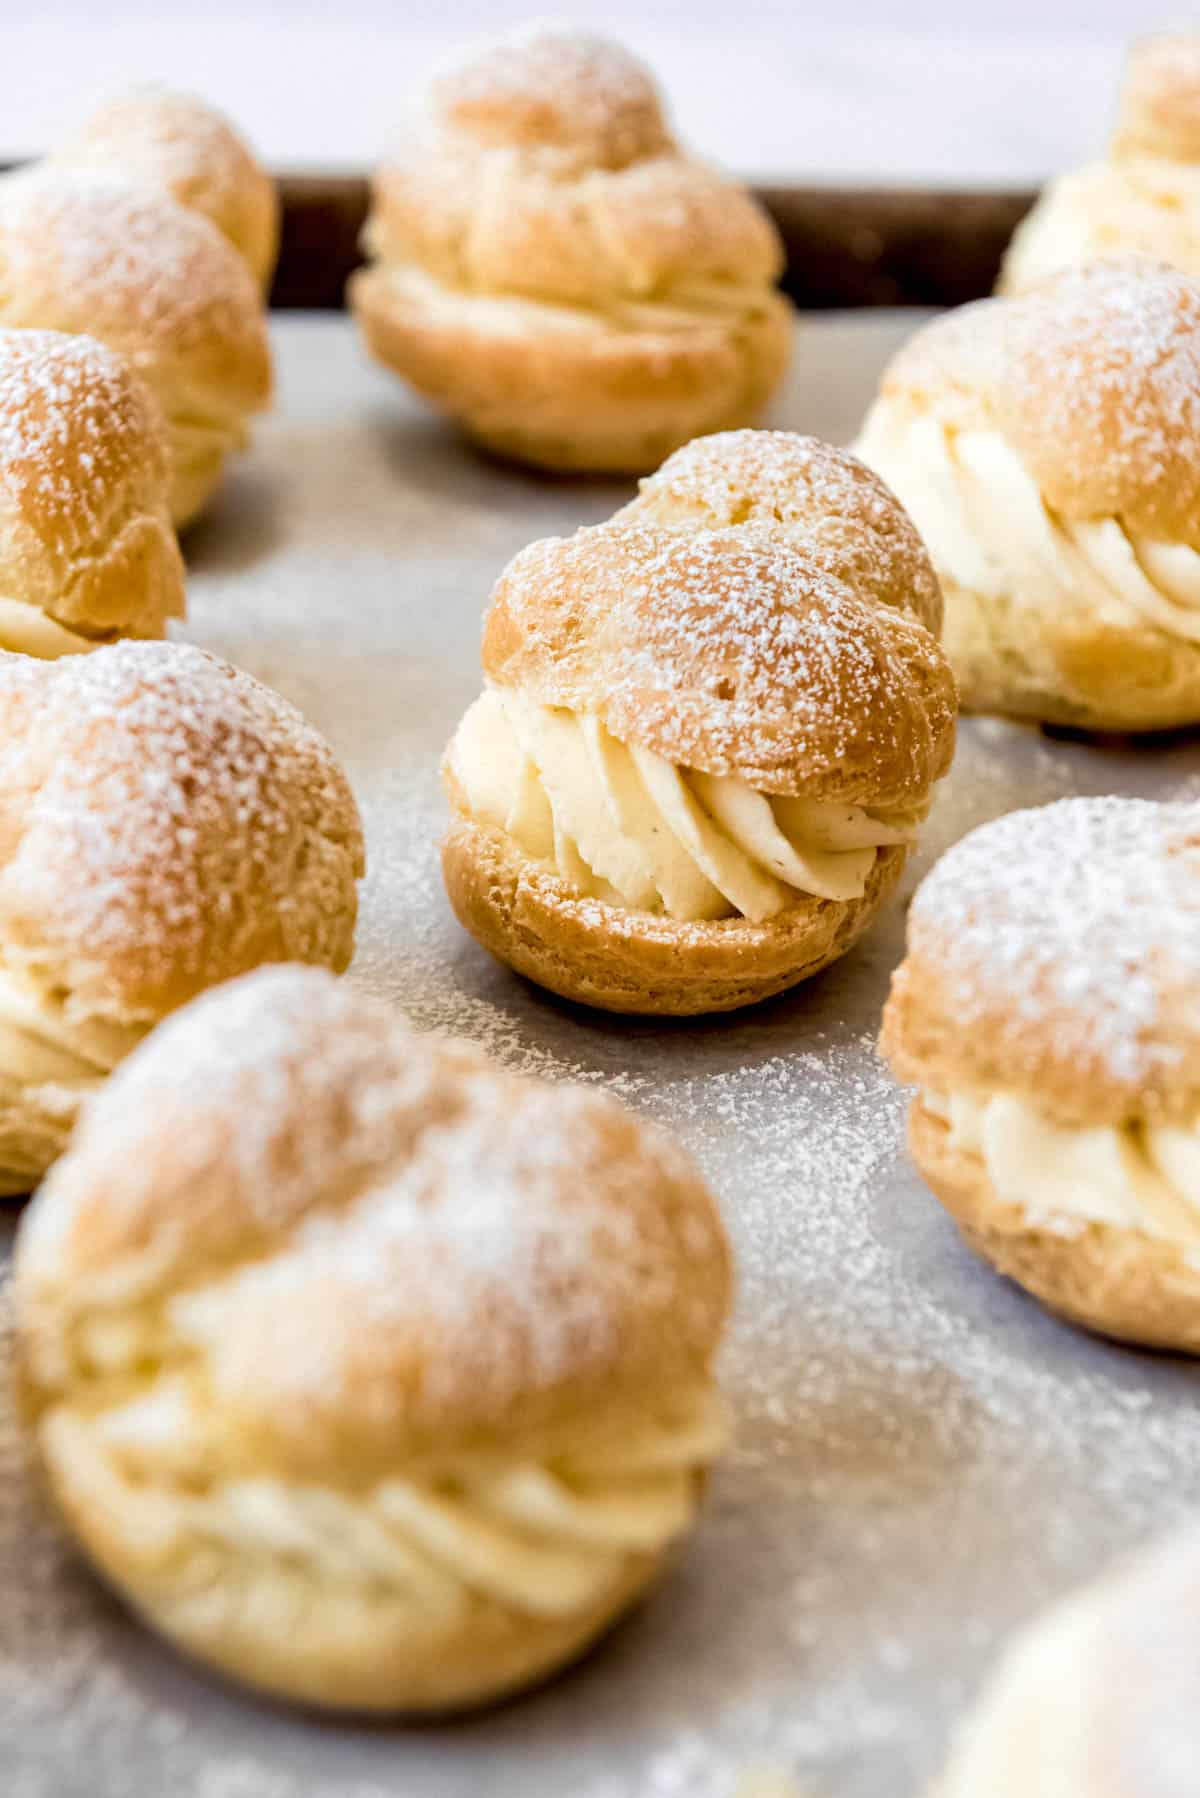 Cream puffs filled with custard filling on a baking sheet.